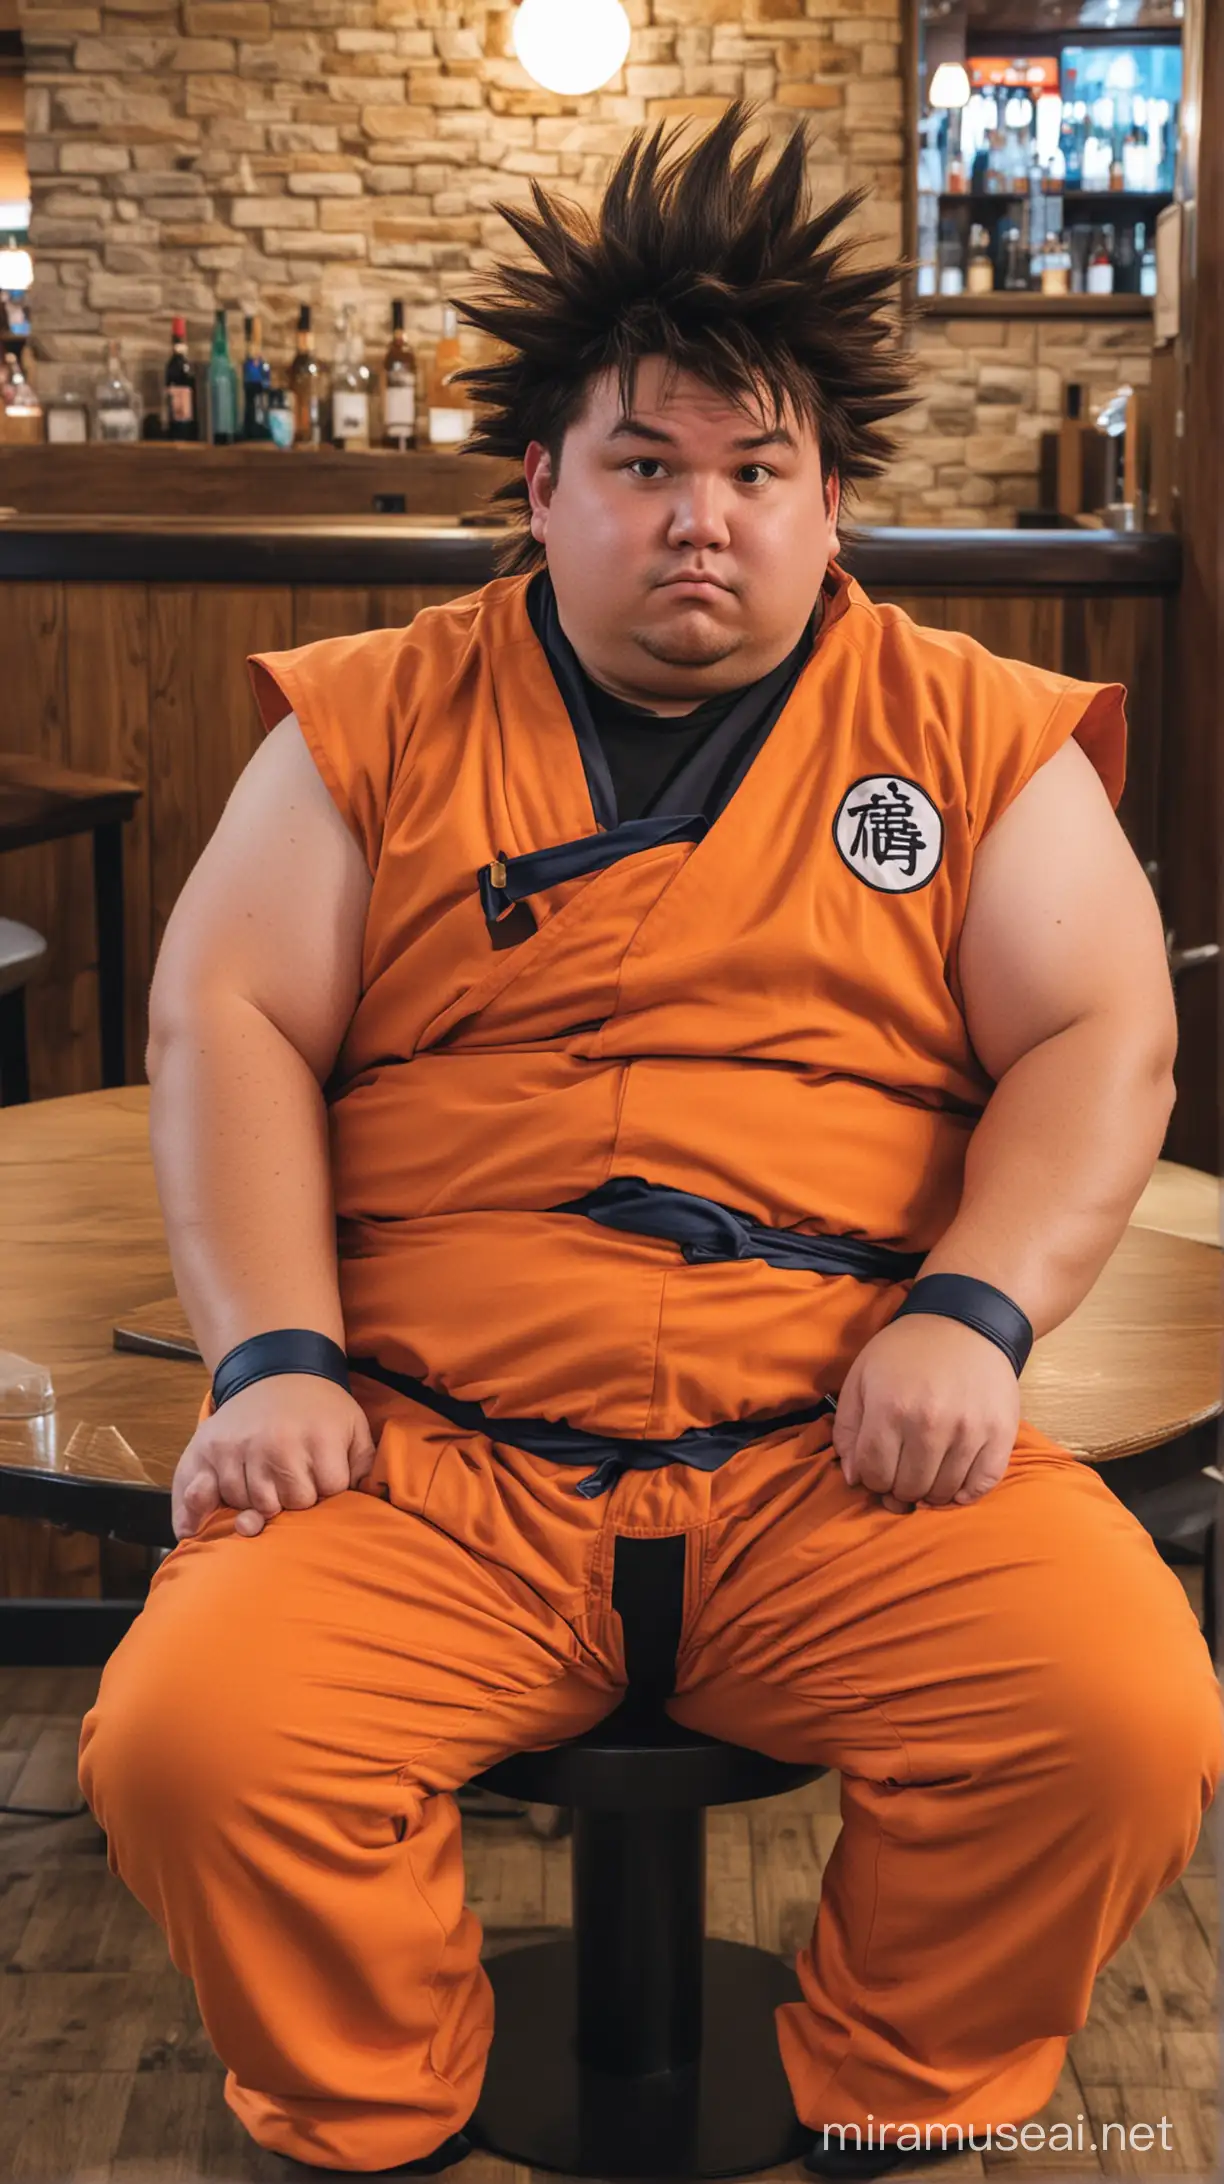 Chubby man dressed in a goku costume sitting sideways in a bar at a small round table